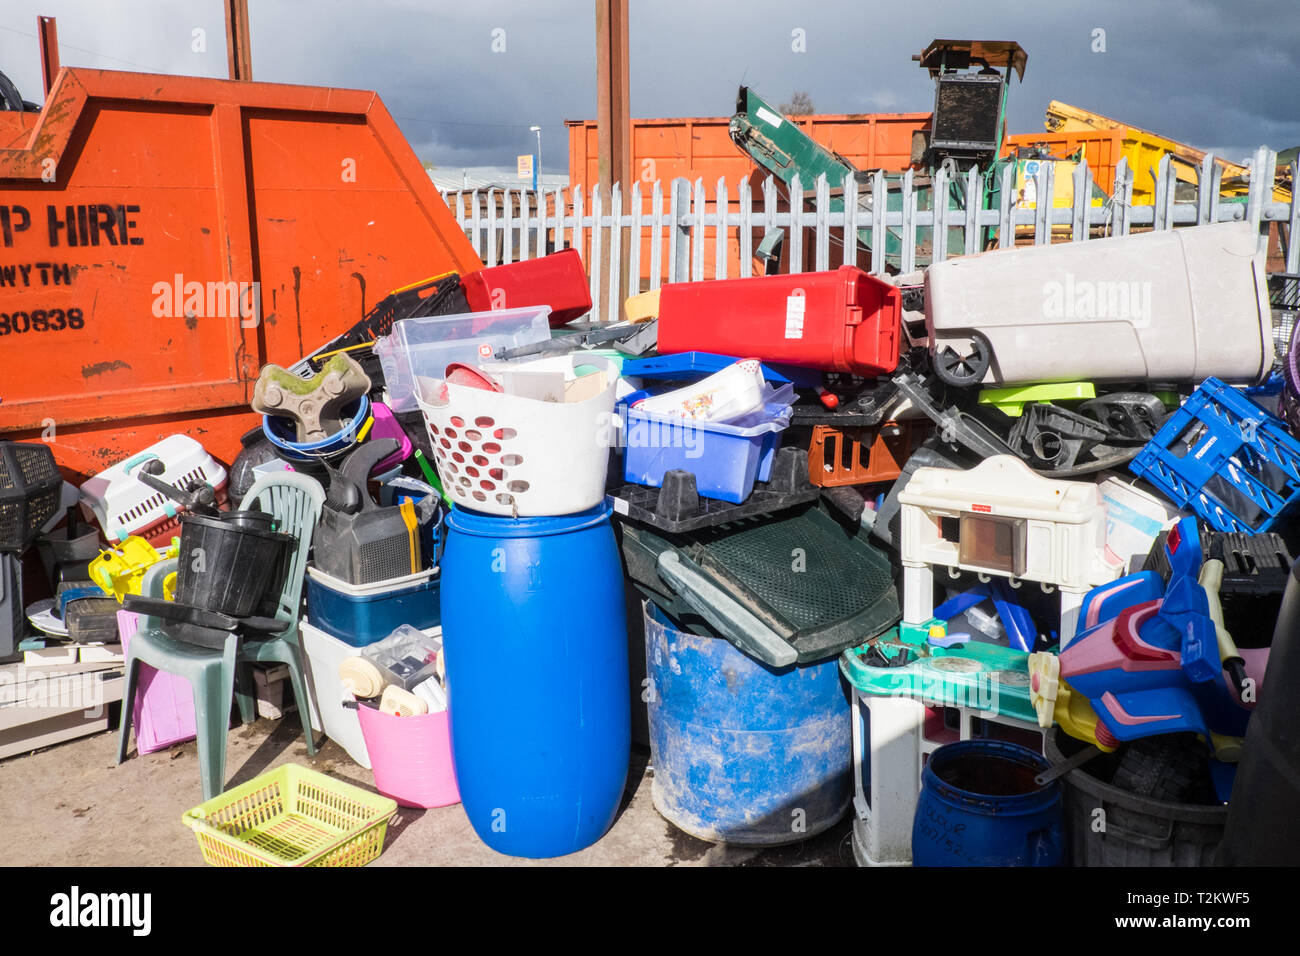 Plastic,plastics,goods,container,containers,Recycling,recycle,reuse,waste,rubbish,tip,centre,center,Aberystwyth,West Wales,Mid Wales,Welsh,UK,GB, Stock Photo